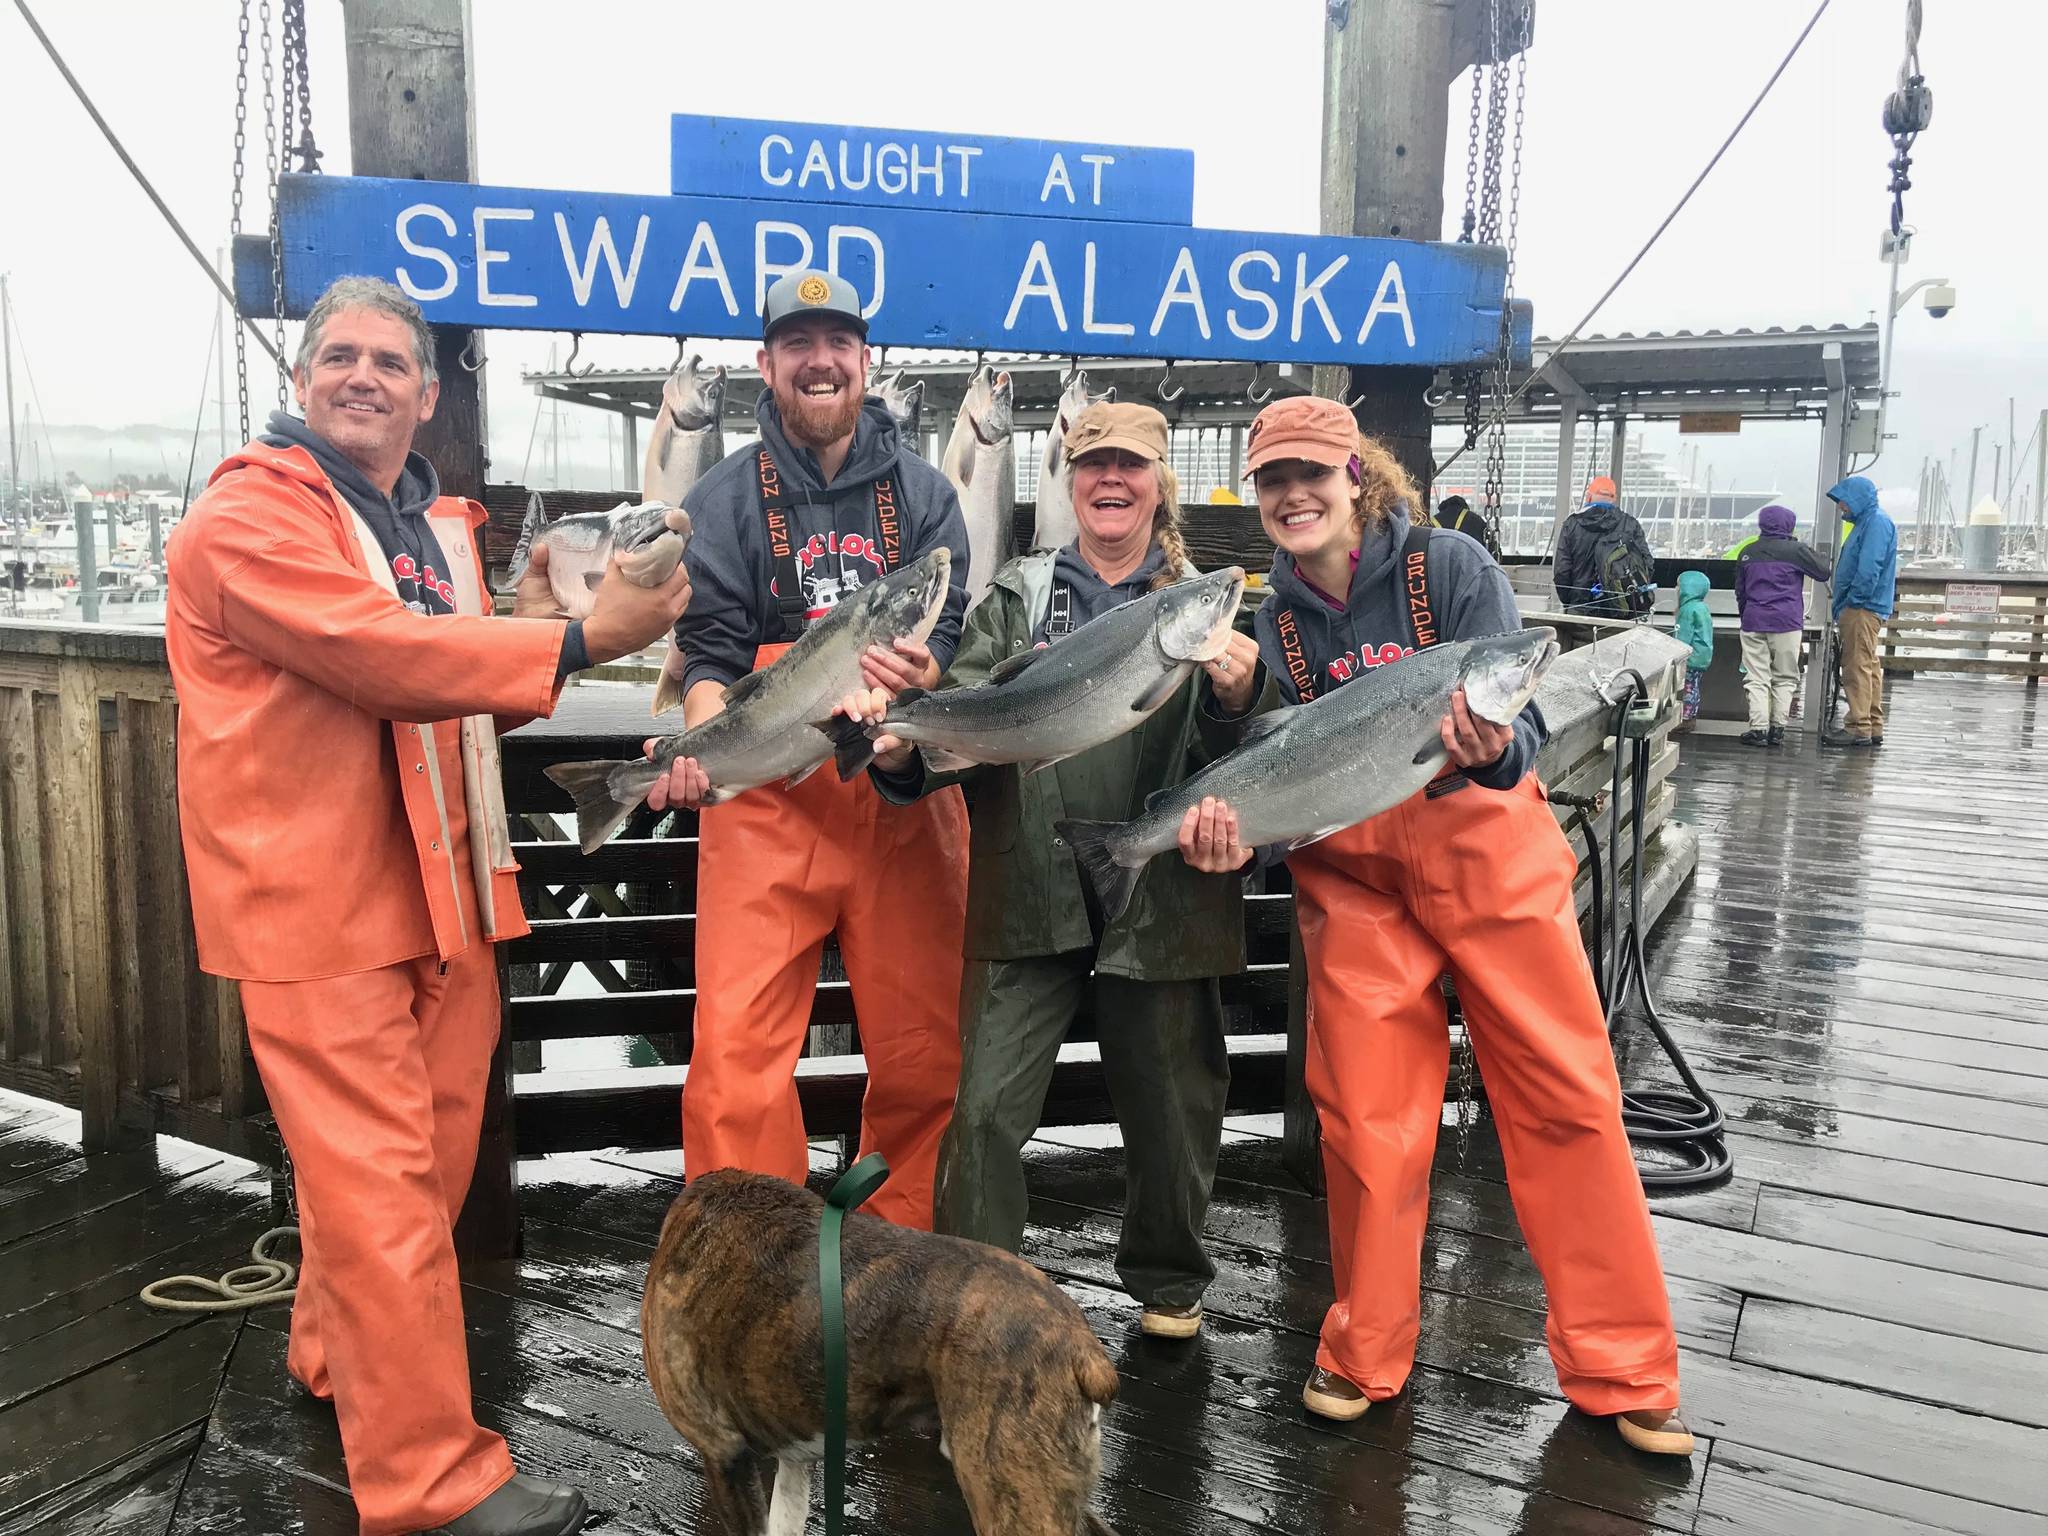 The Ferrin family of Anchorage show off their catches during 2018’s Seward Silver Salmon Derby in Seward, Alaska. Colleen Ferrin took home second place in the overall tournament with a 16.19 pound fish. (Photo courtesy of Seward Chamber of Commerce)